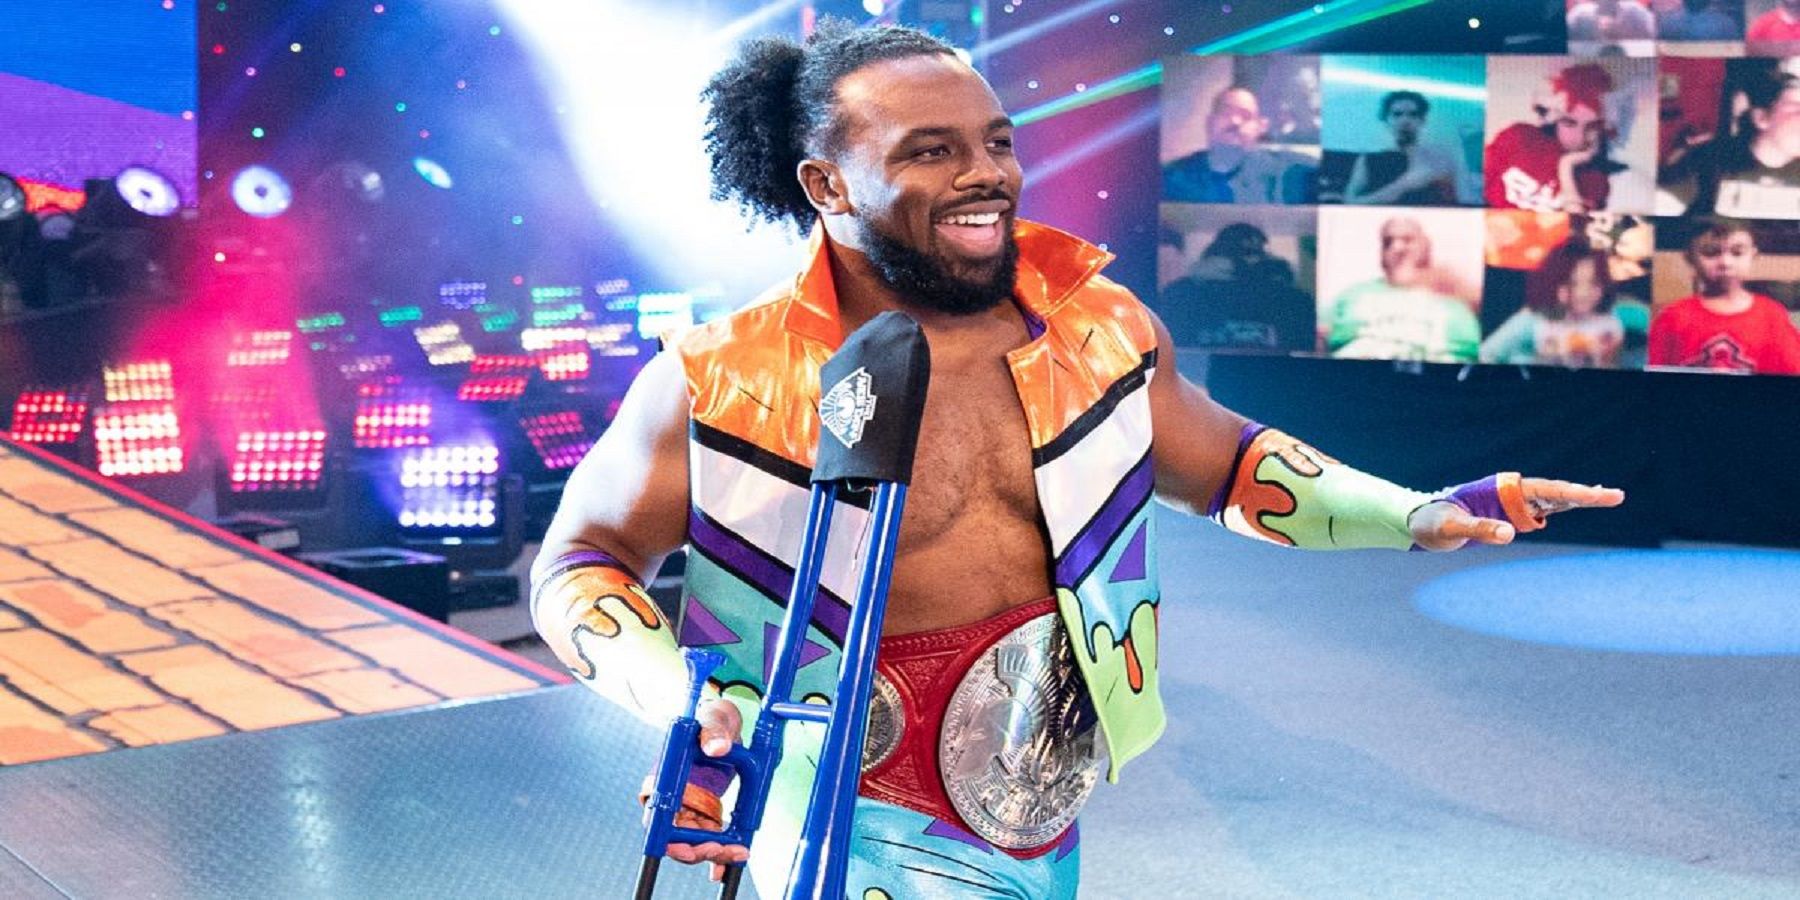 Xavier Woods' Christmas was extremely fruitful for his video game collection.